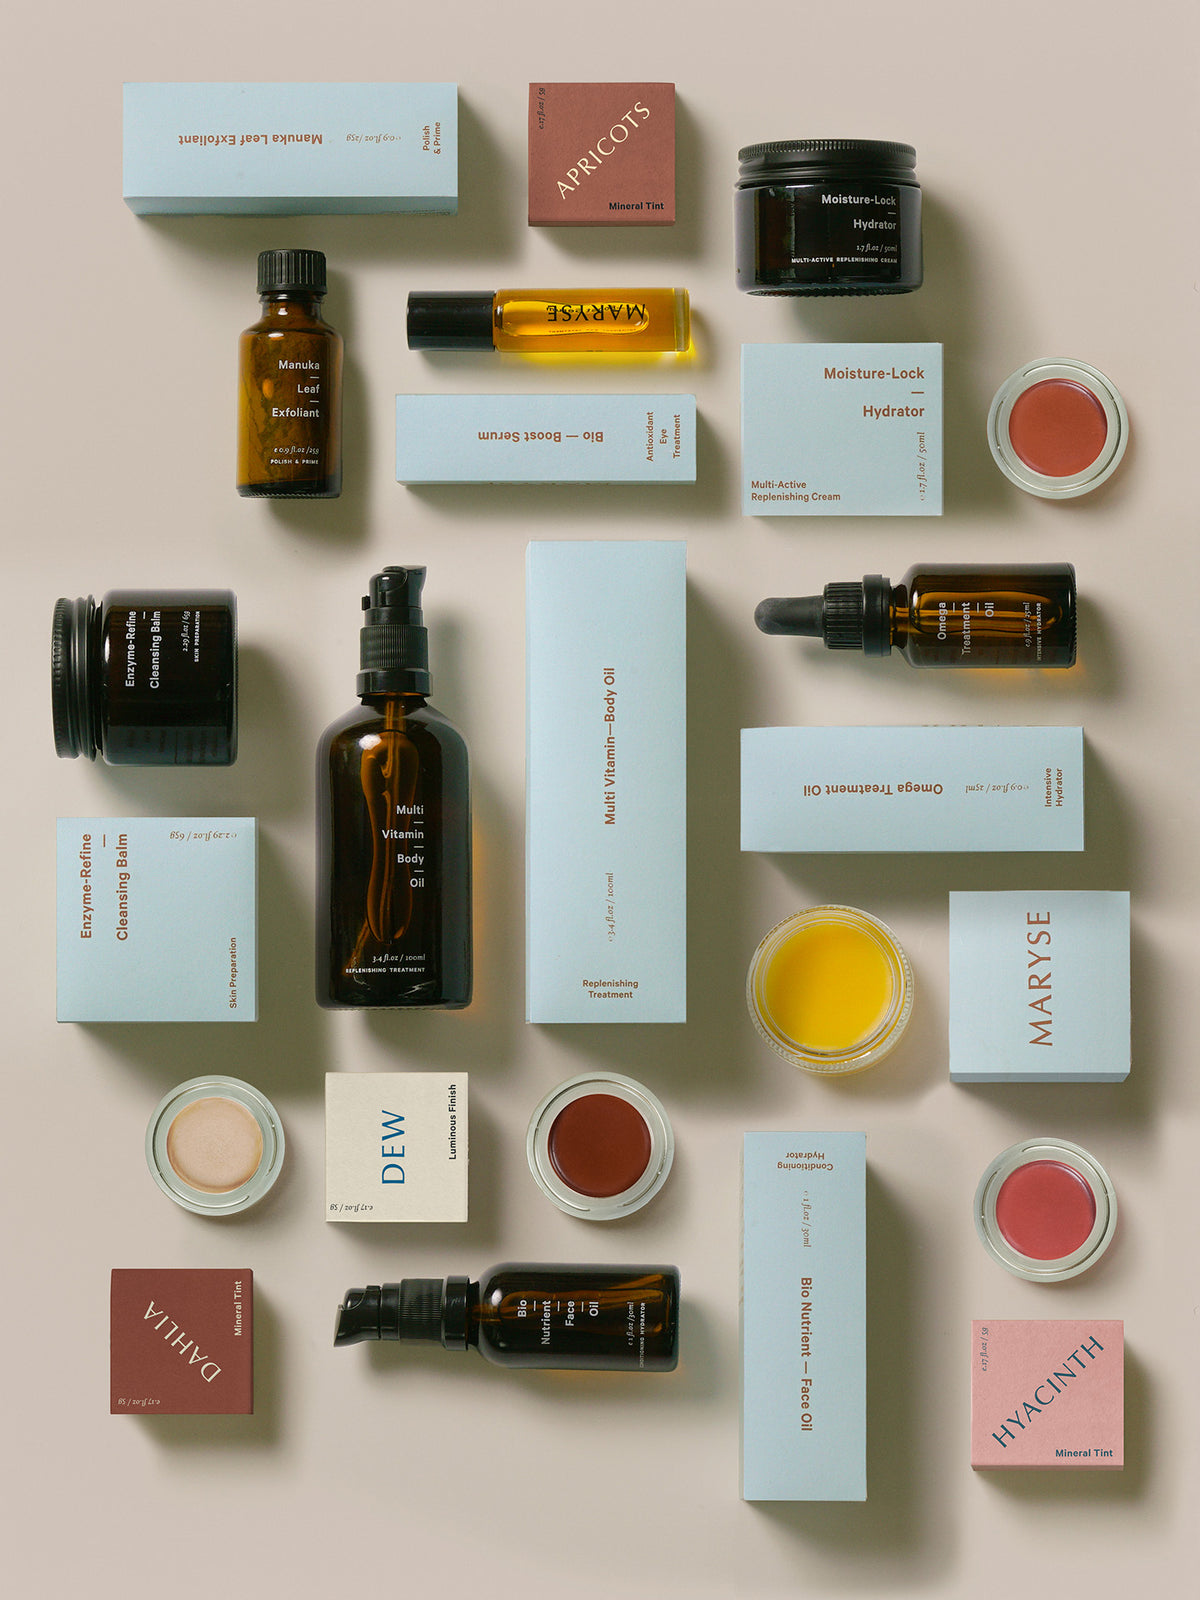 A collection of MARYSE Treatment – Balm products arranged on a white surface.